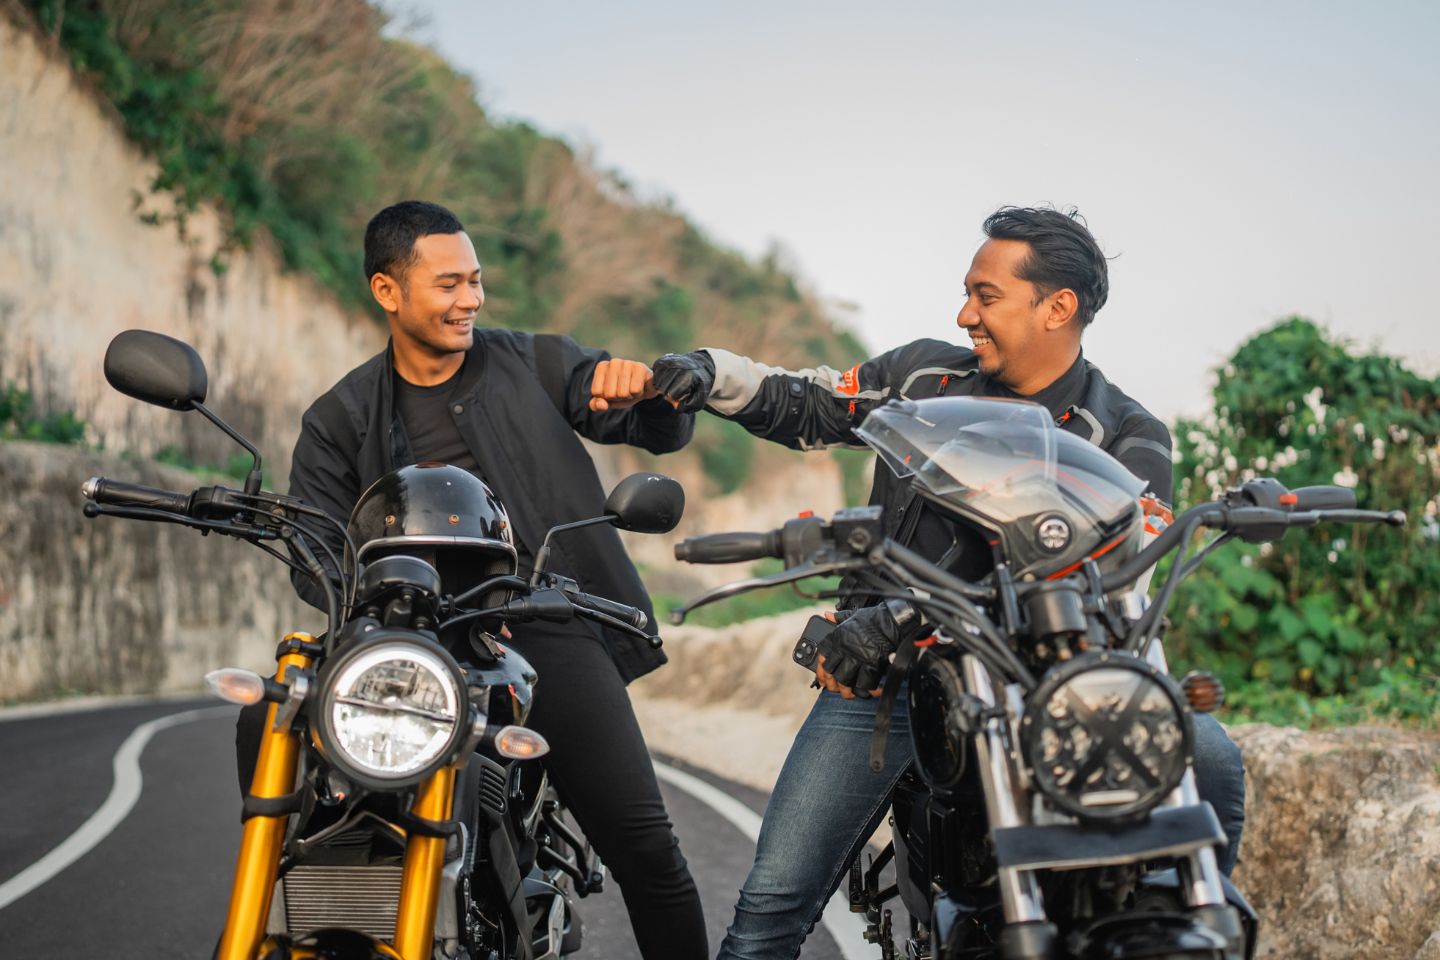 Overview of California Motorcycle Accident Statistics